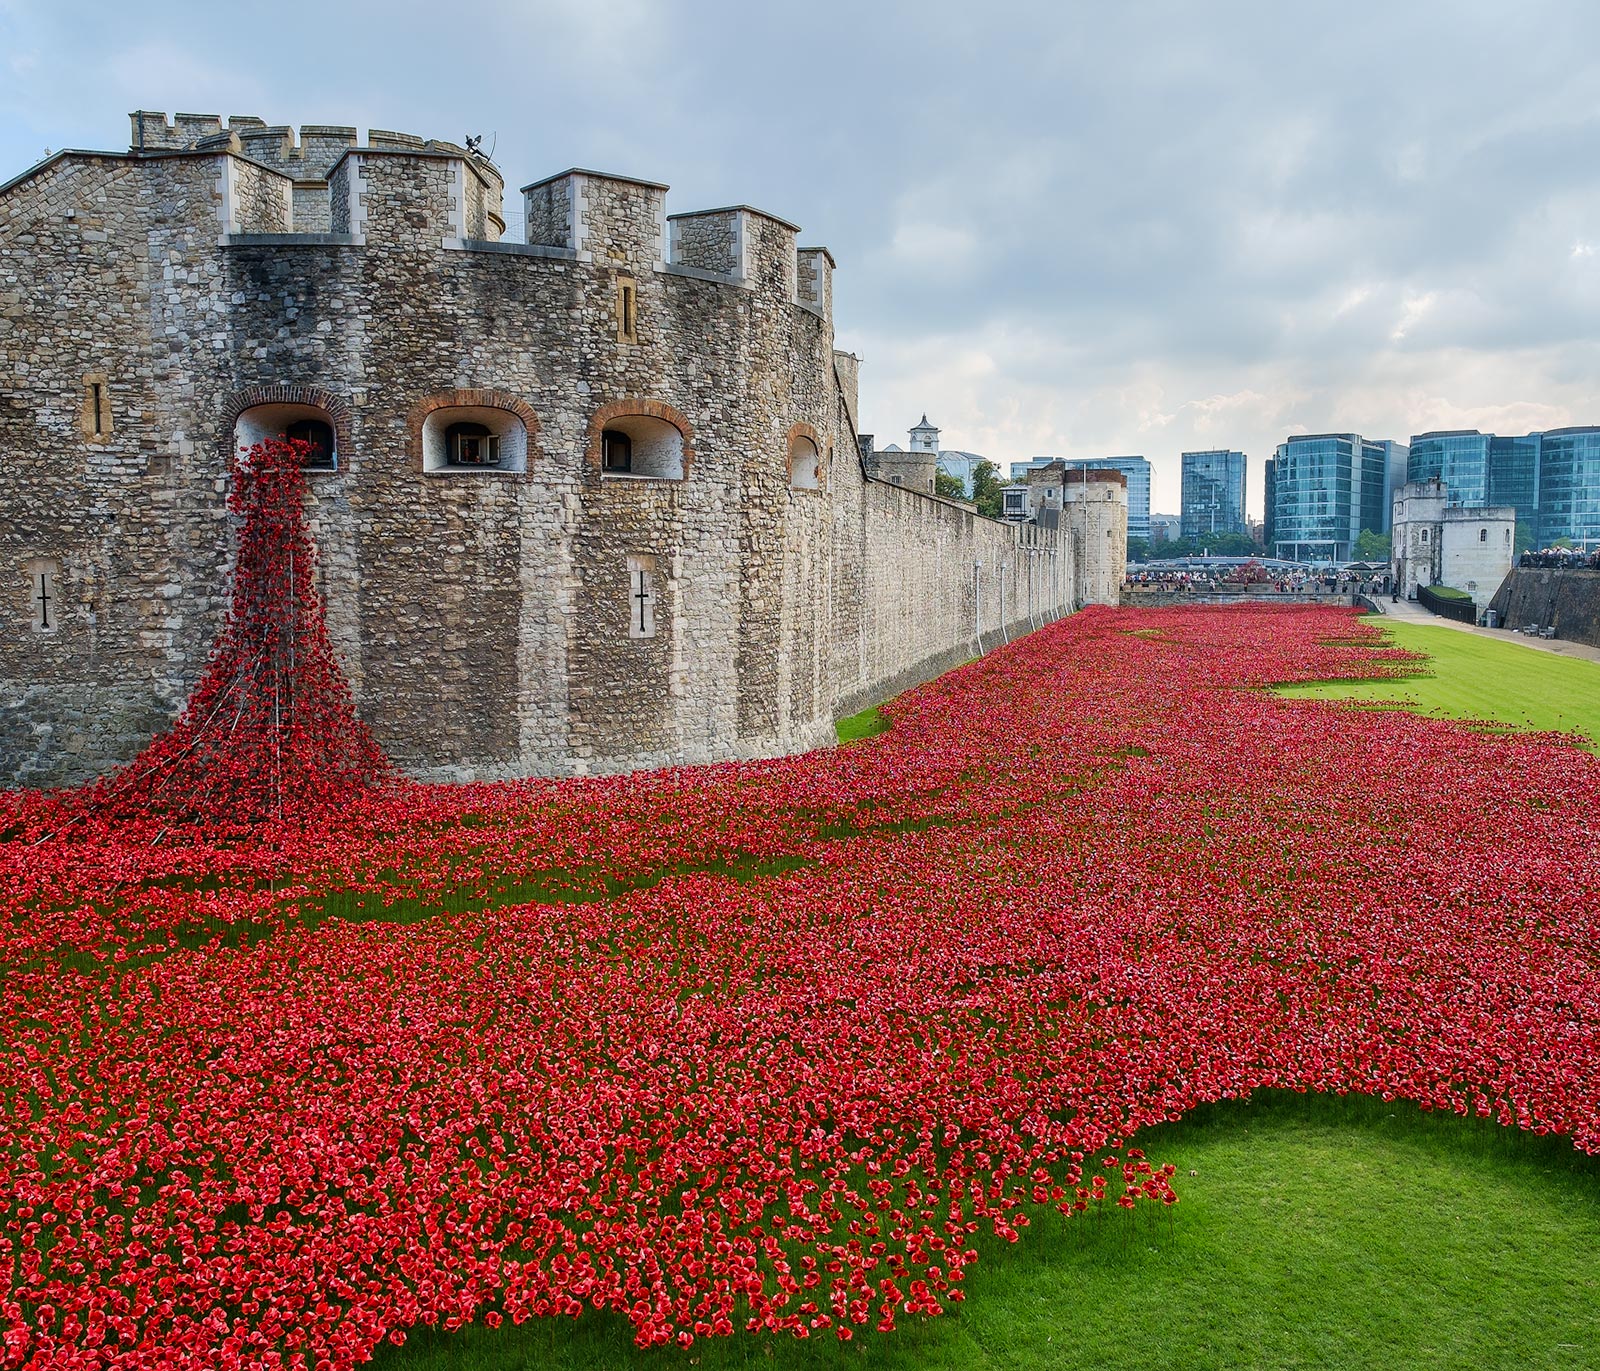 Ceramic poppies in the Tower Moat - Fuji XE-1 and 14mm lens